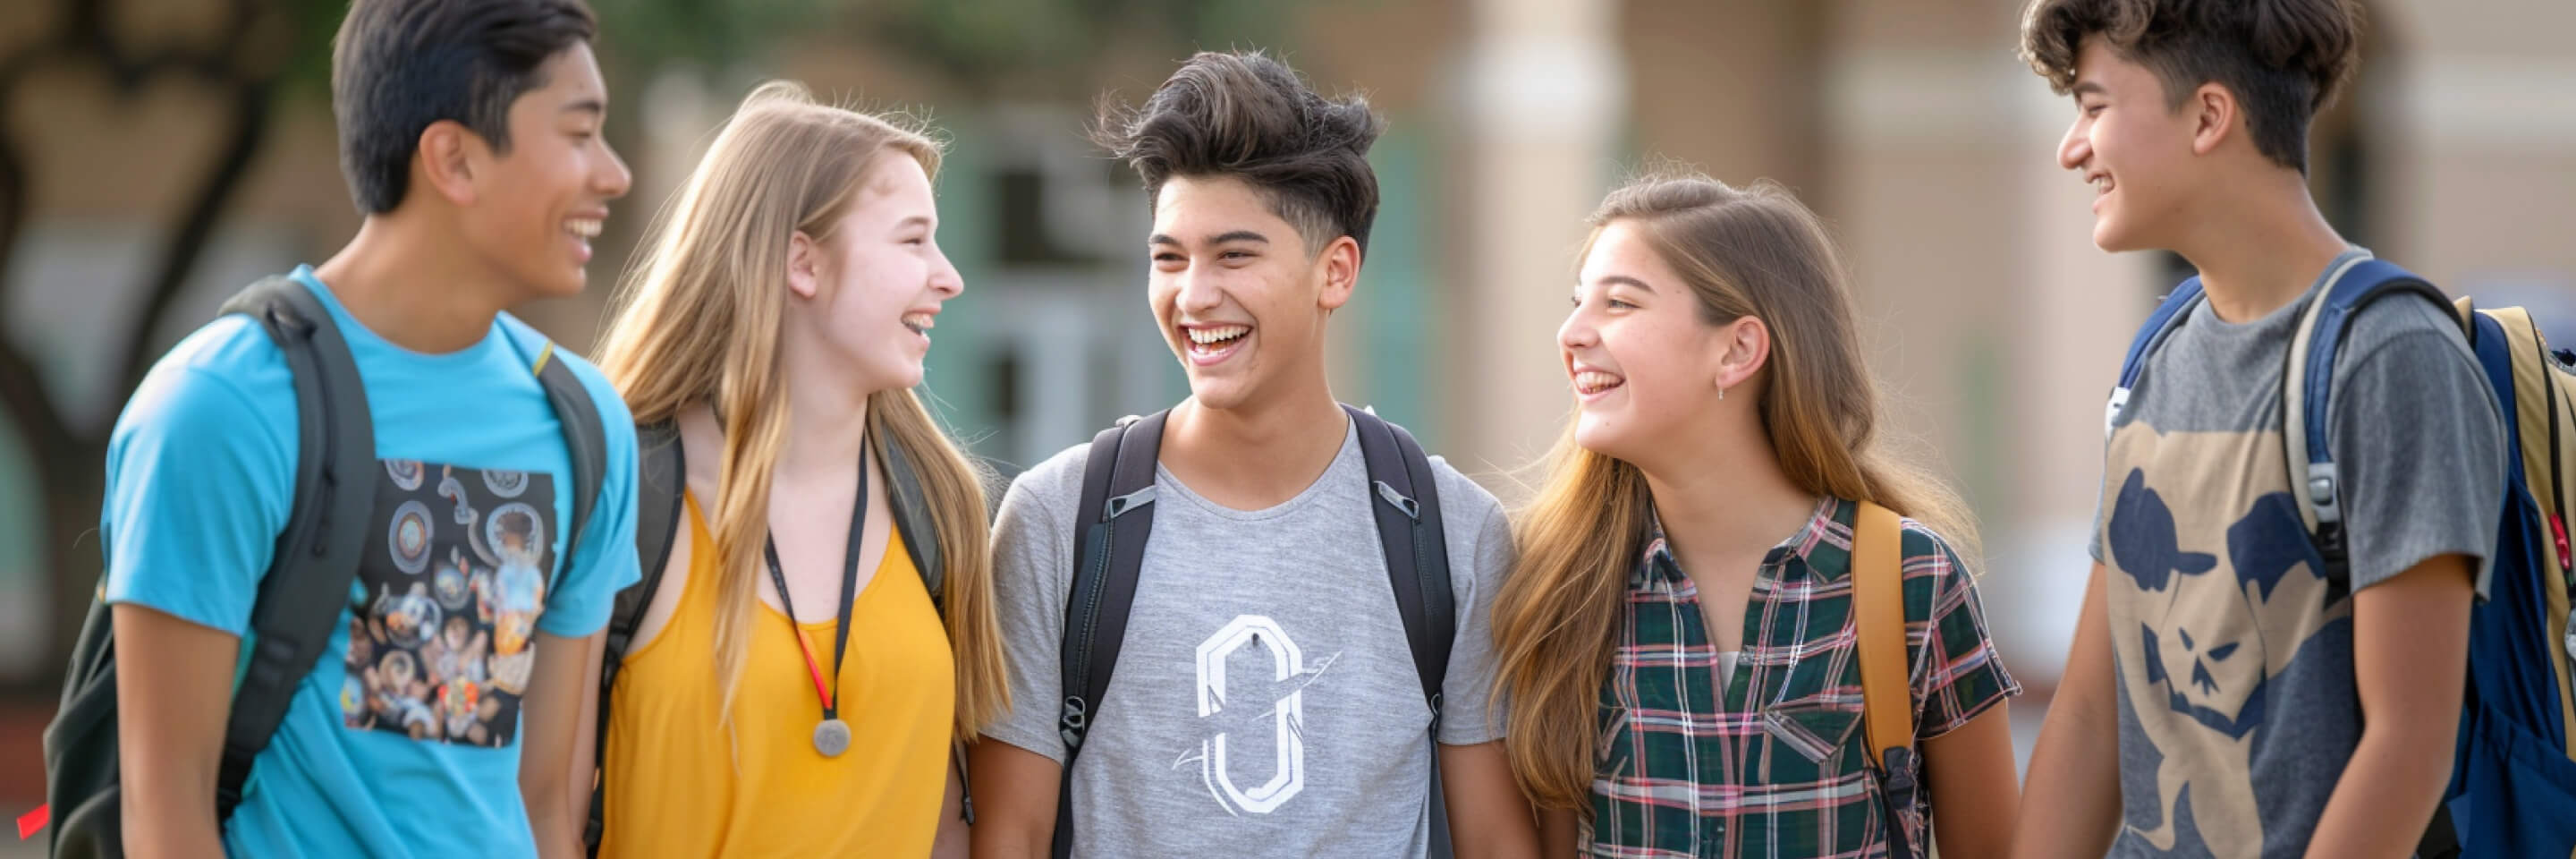 a group of diverse students smiling and happily on school campus